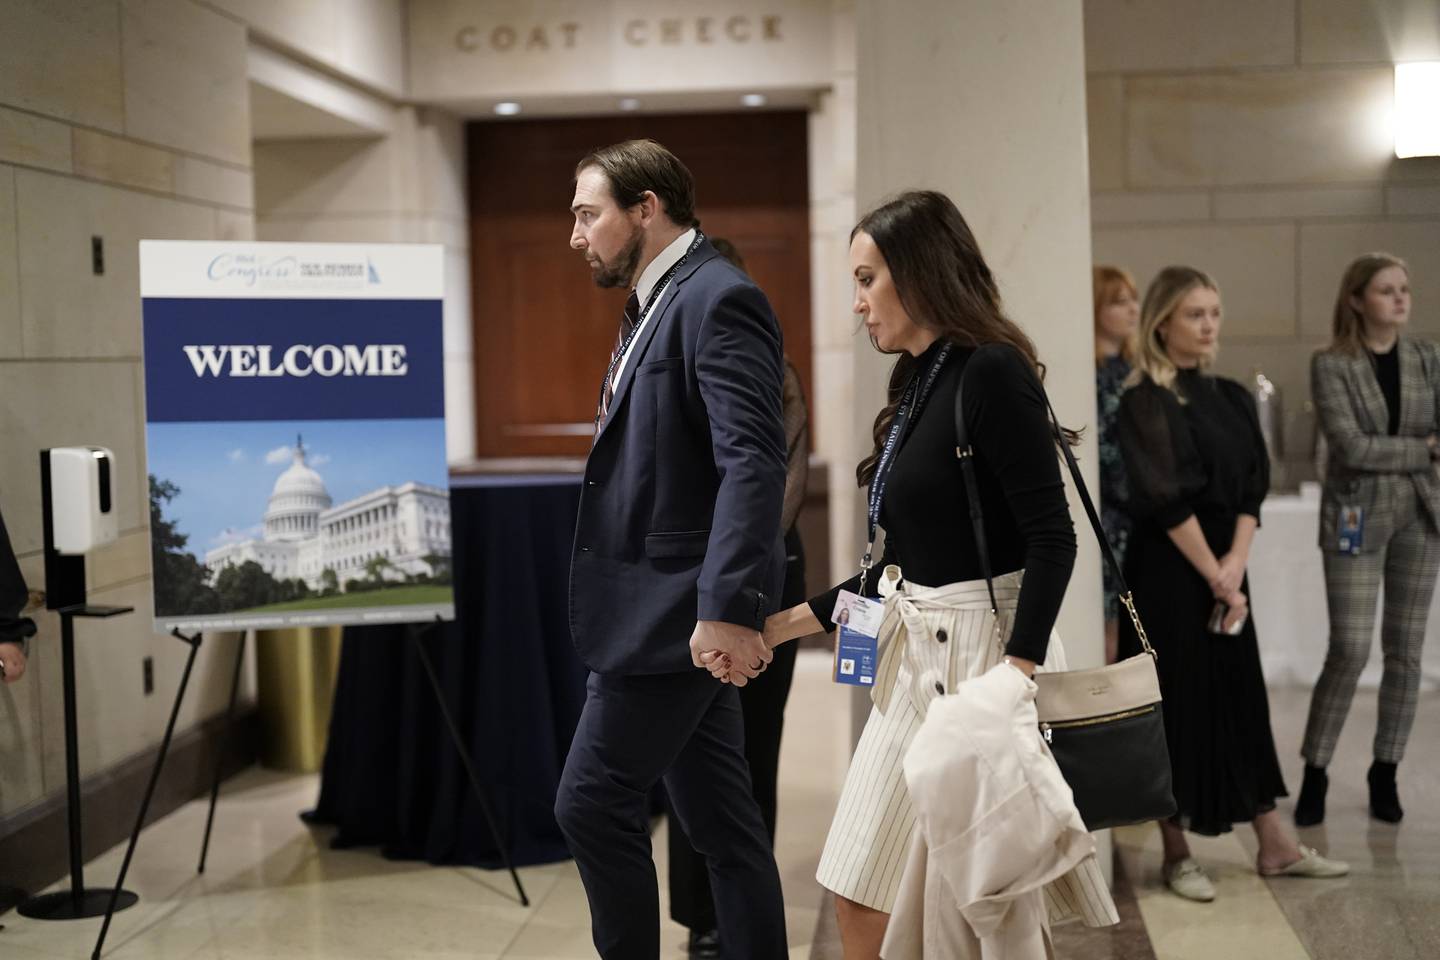 Congressman-elect Eli Crane and his wife Jen Crane arrive with newly elected members of the House of Representatives for an orientation program at the Capitol. AP